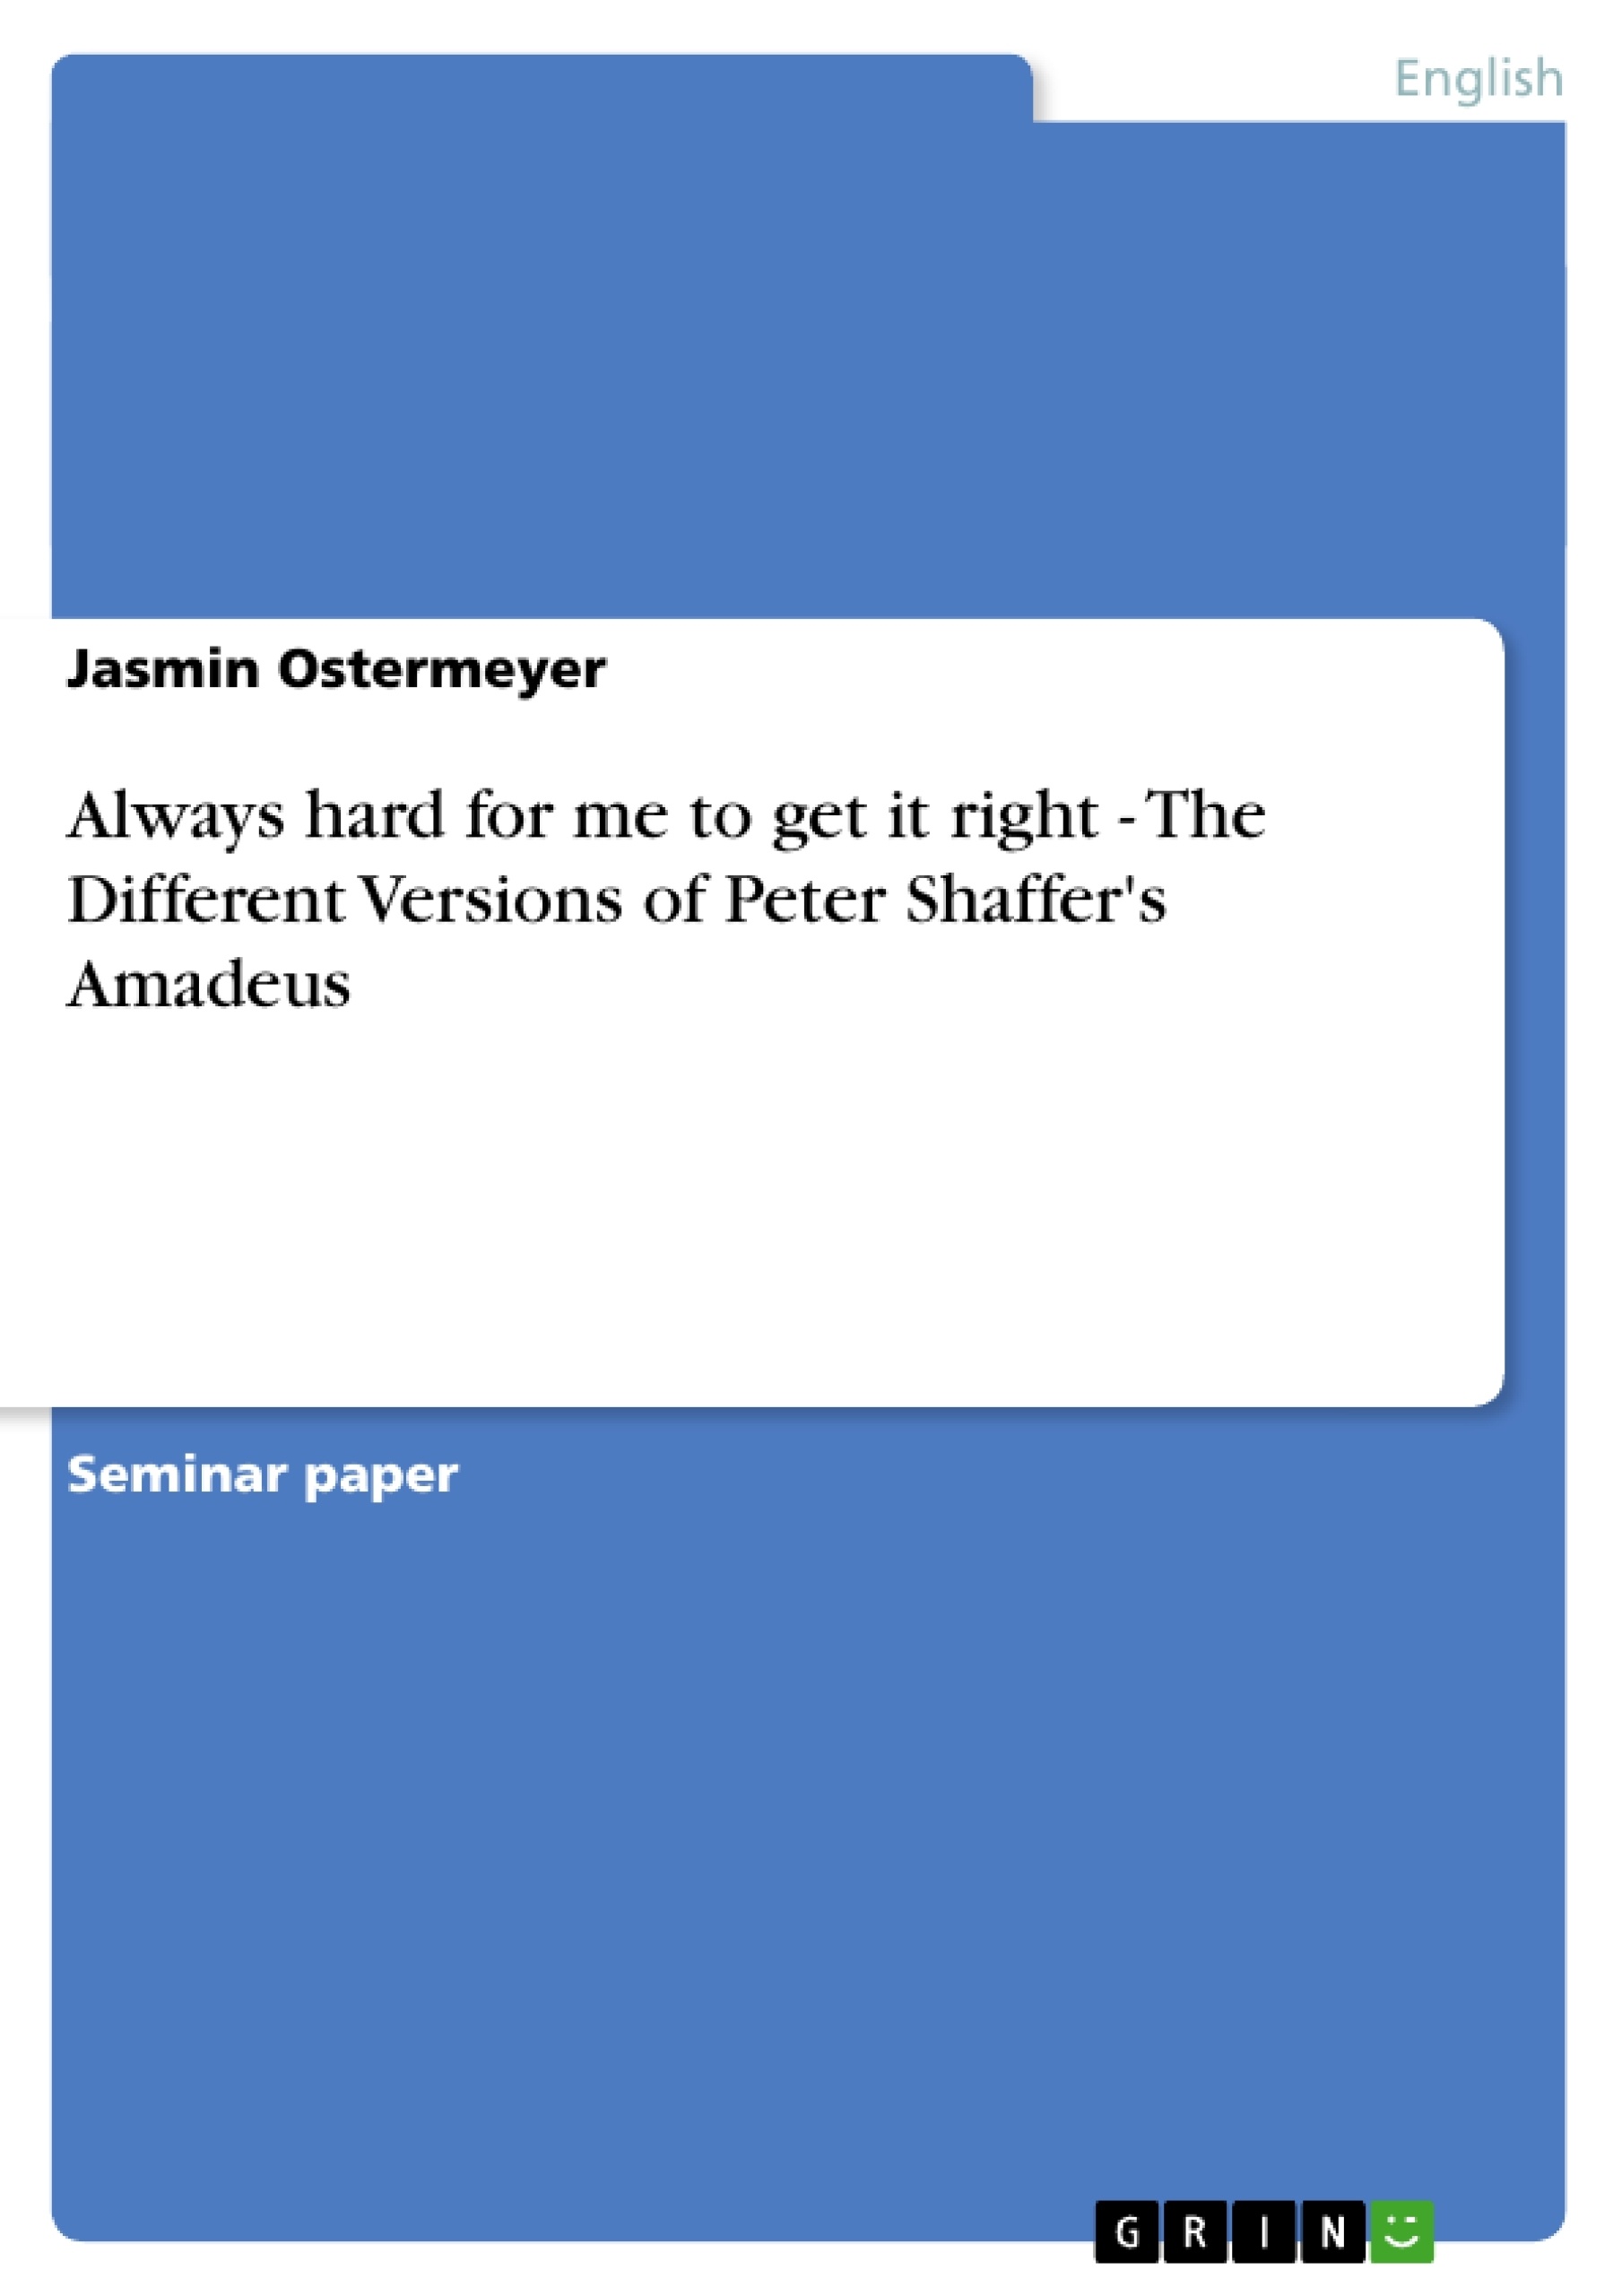 Title: Always hard for me to get it right - The Different Versions of Peter Shaffer's Amadeus